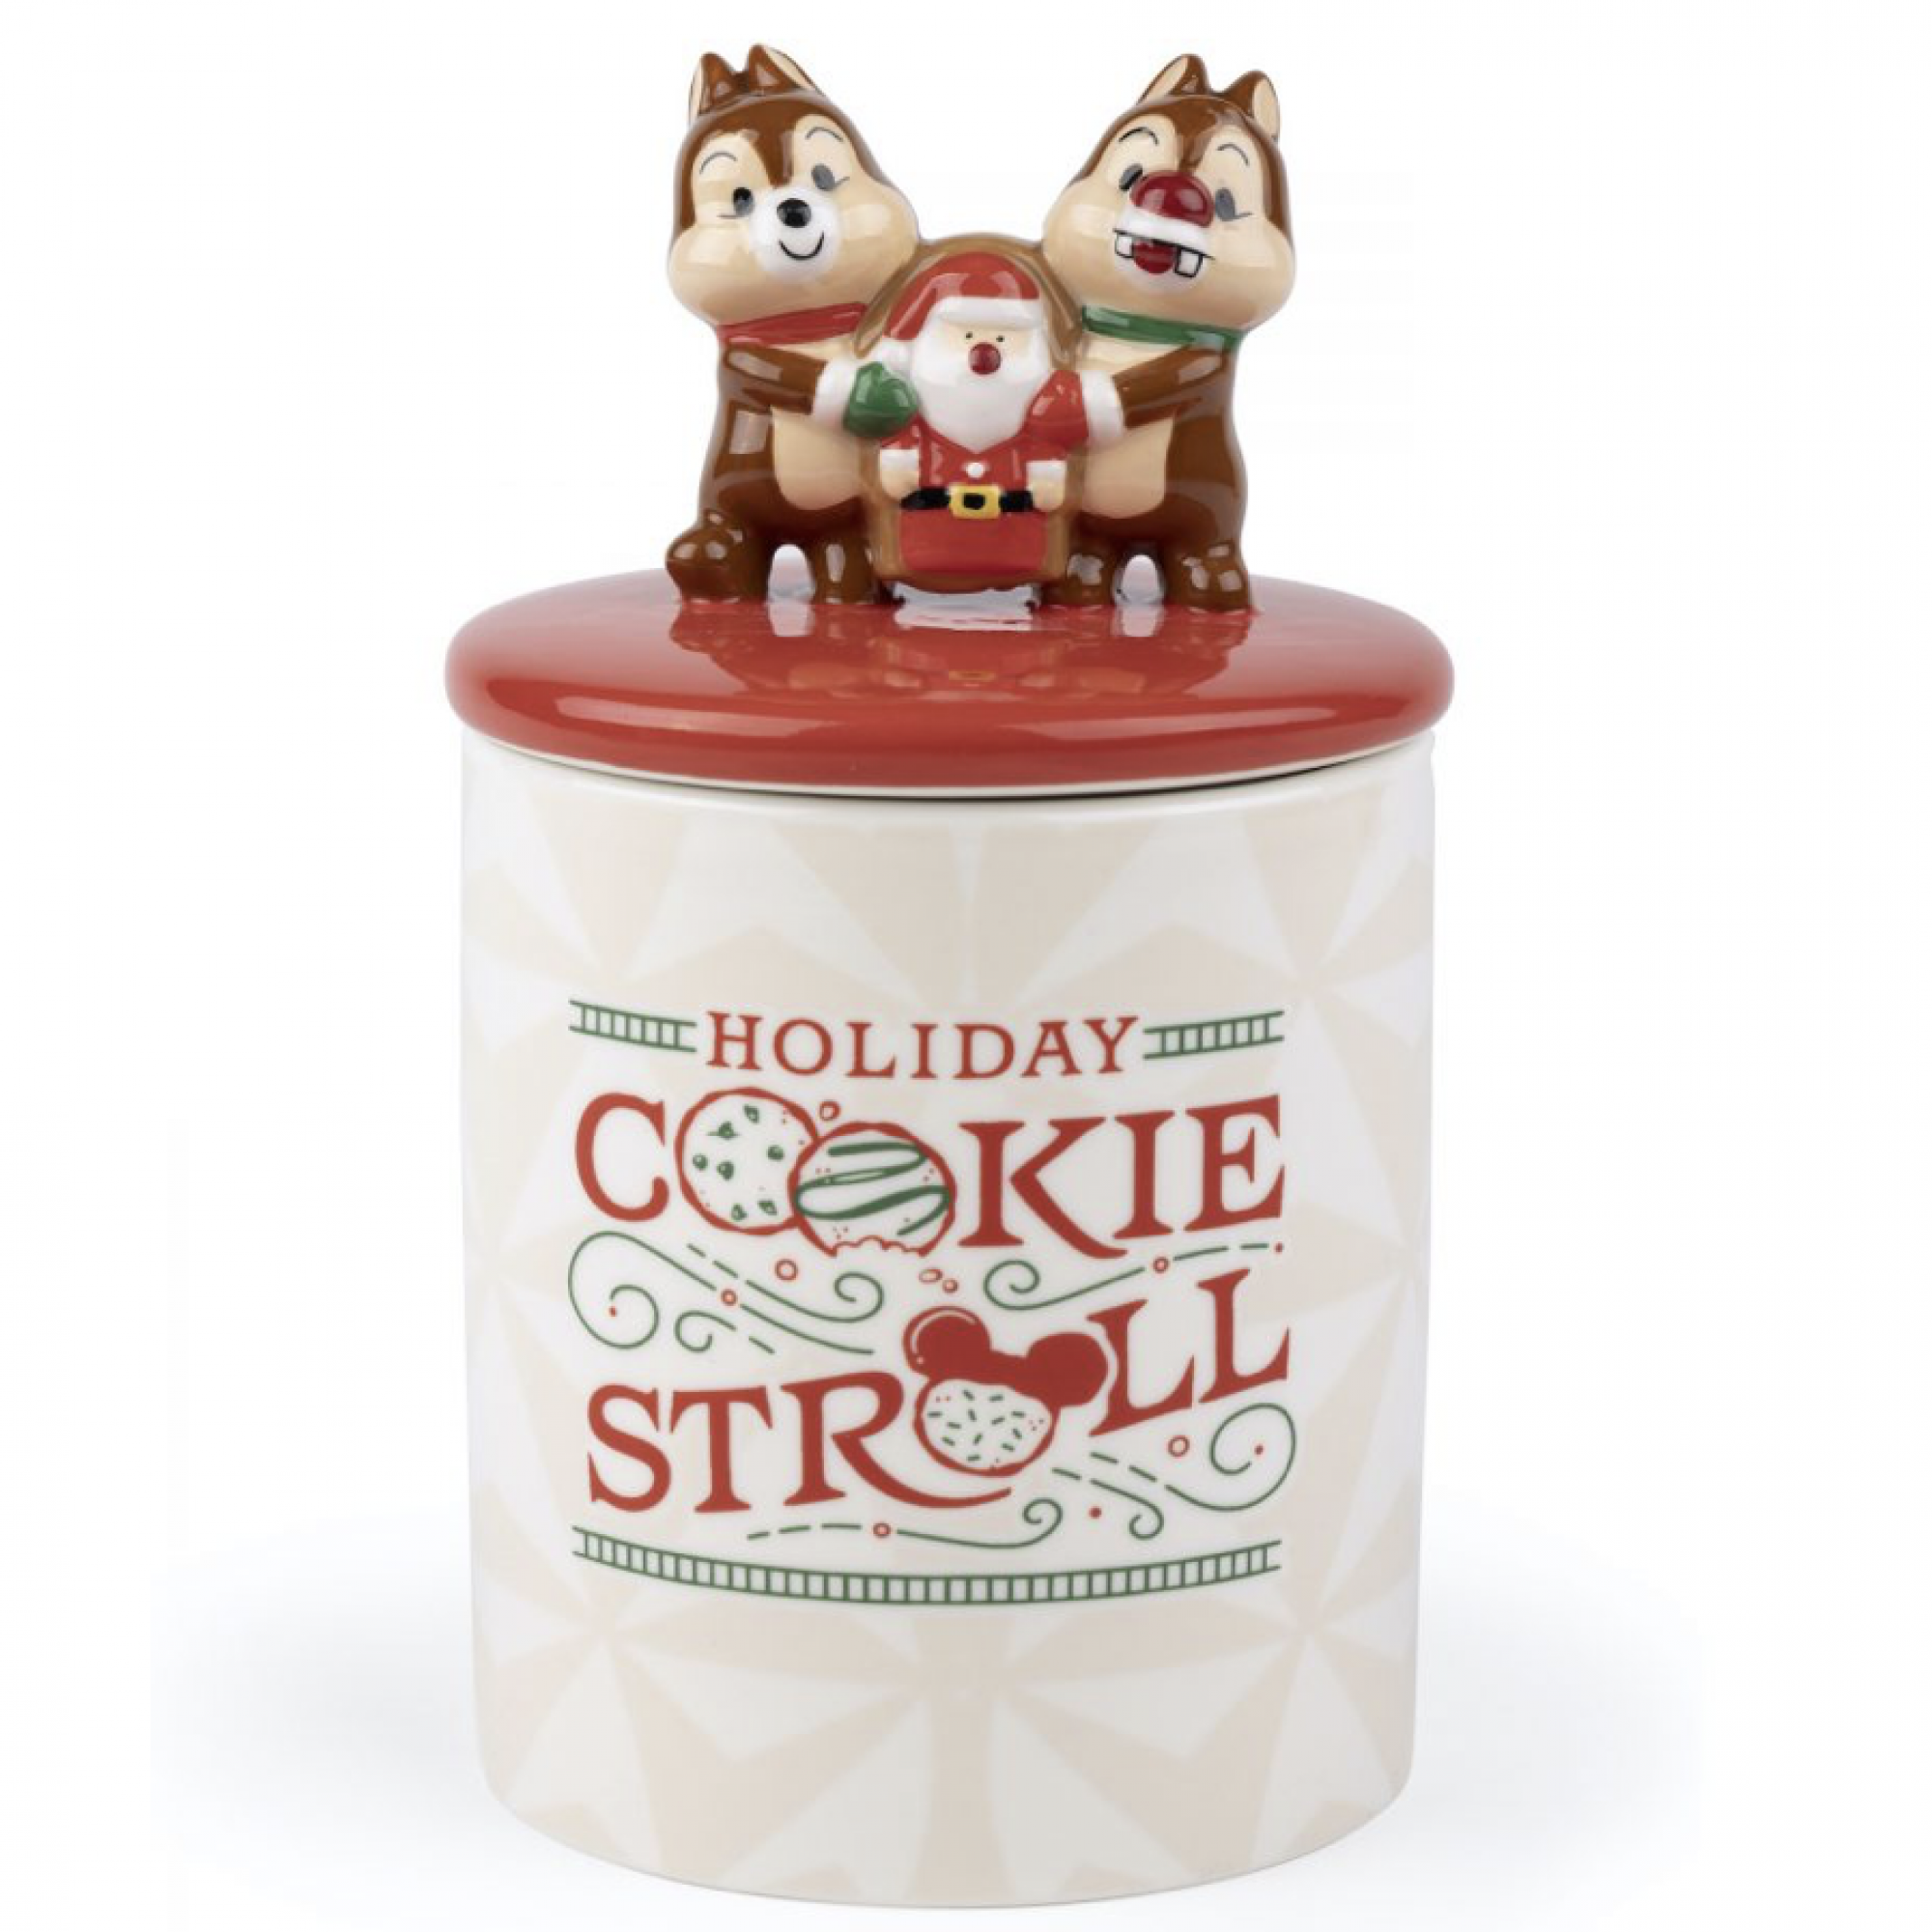 Holiday Cookie Stroll canister available at the holiday merchandise shops during the festival of the holidays.